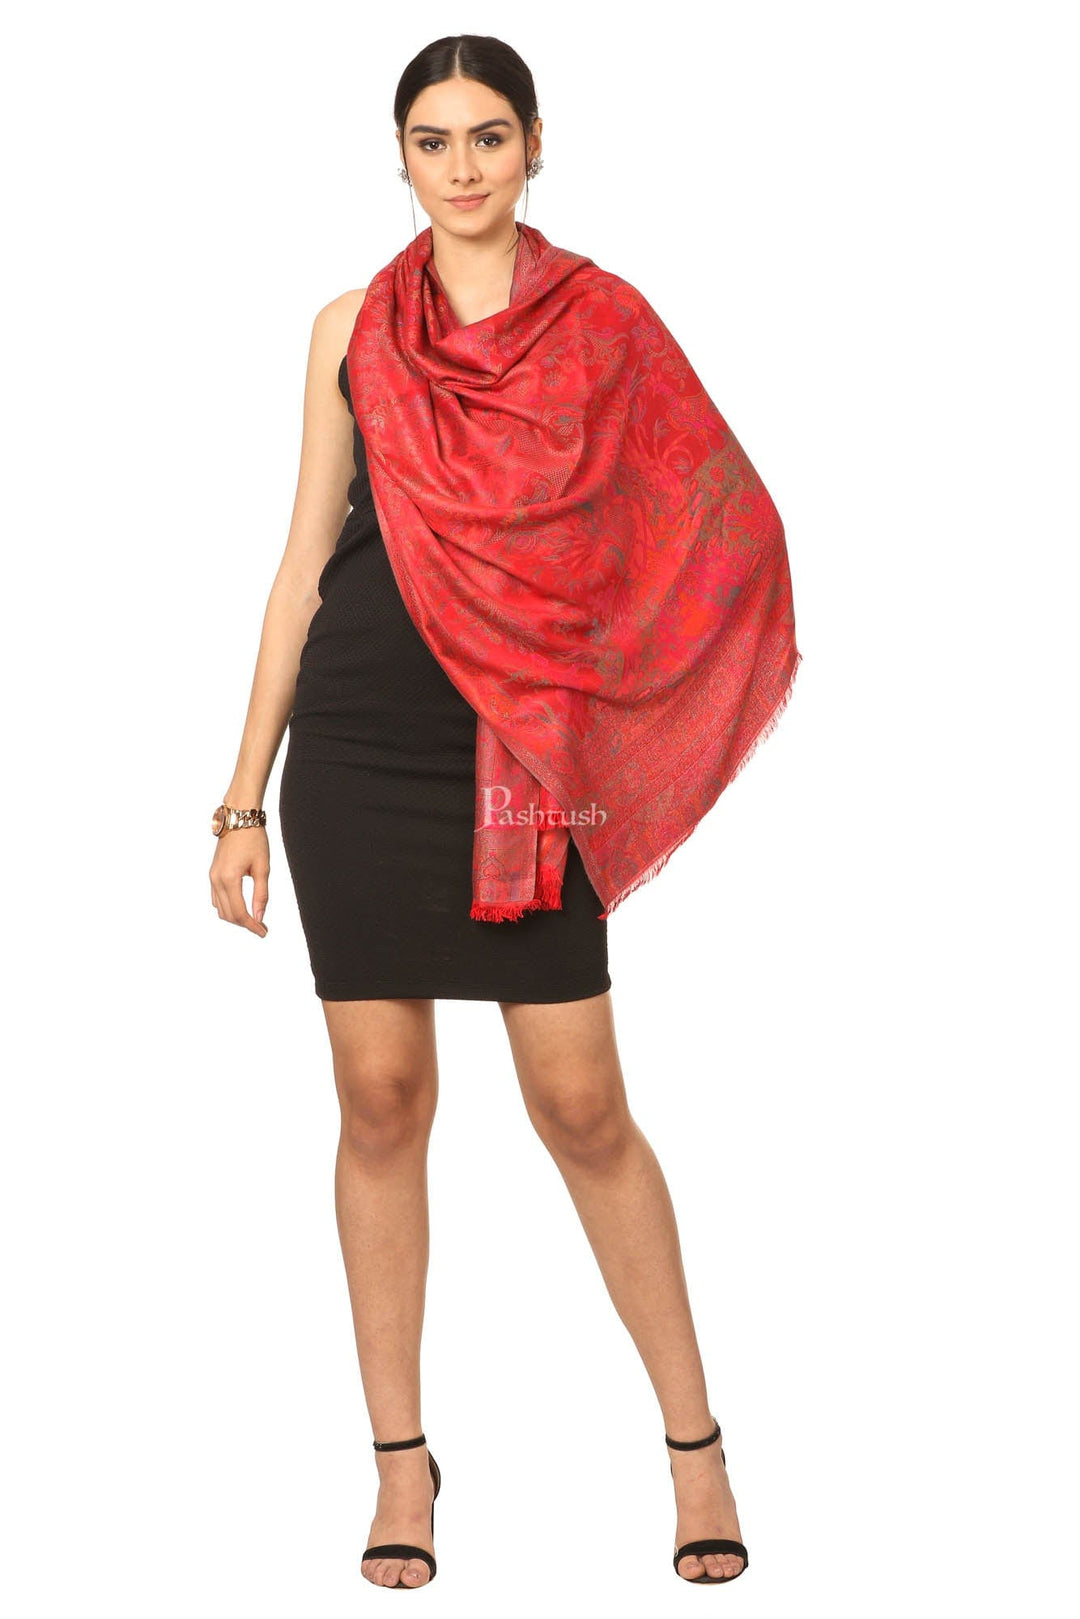 Pashtush India Womens Stoles and Scarves Scarf Pashtush Women'S Soft Bamboo Scarf, Casual, Stole, Wrap - Red